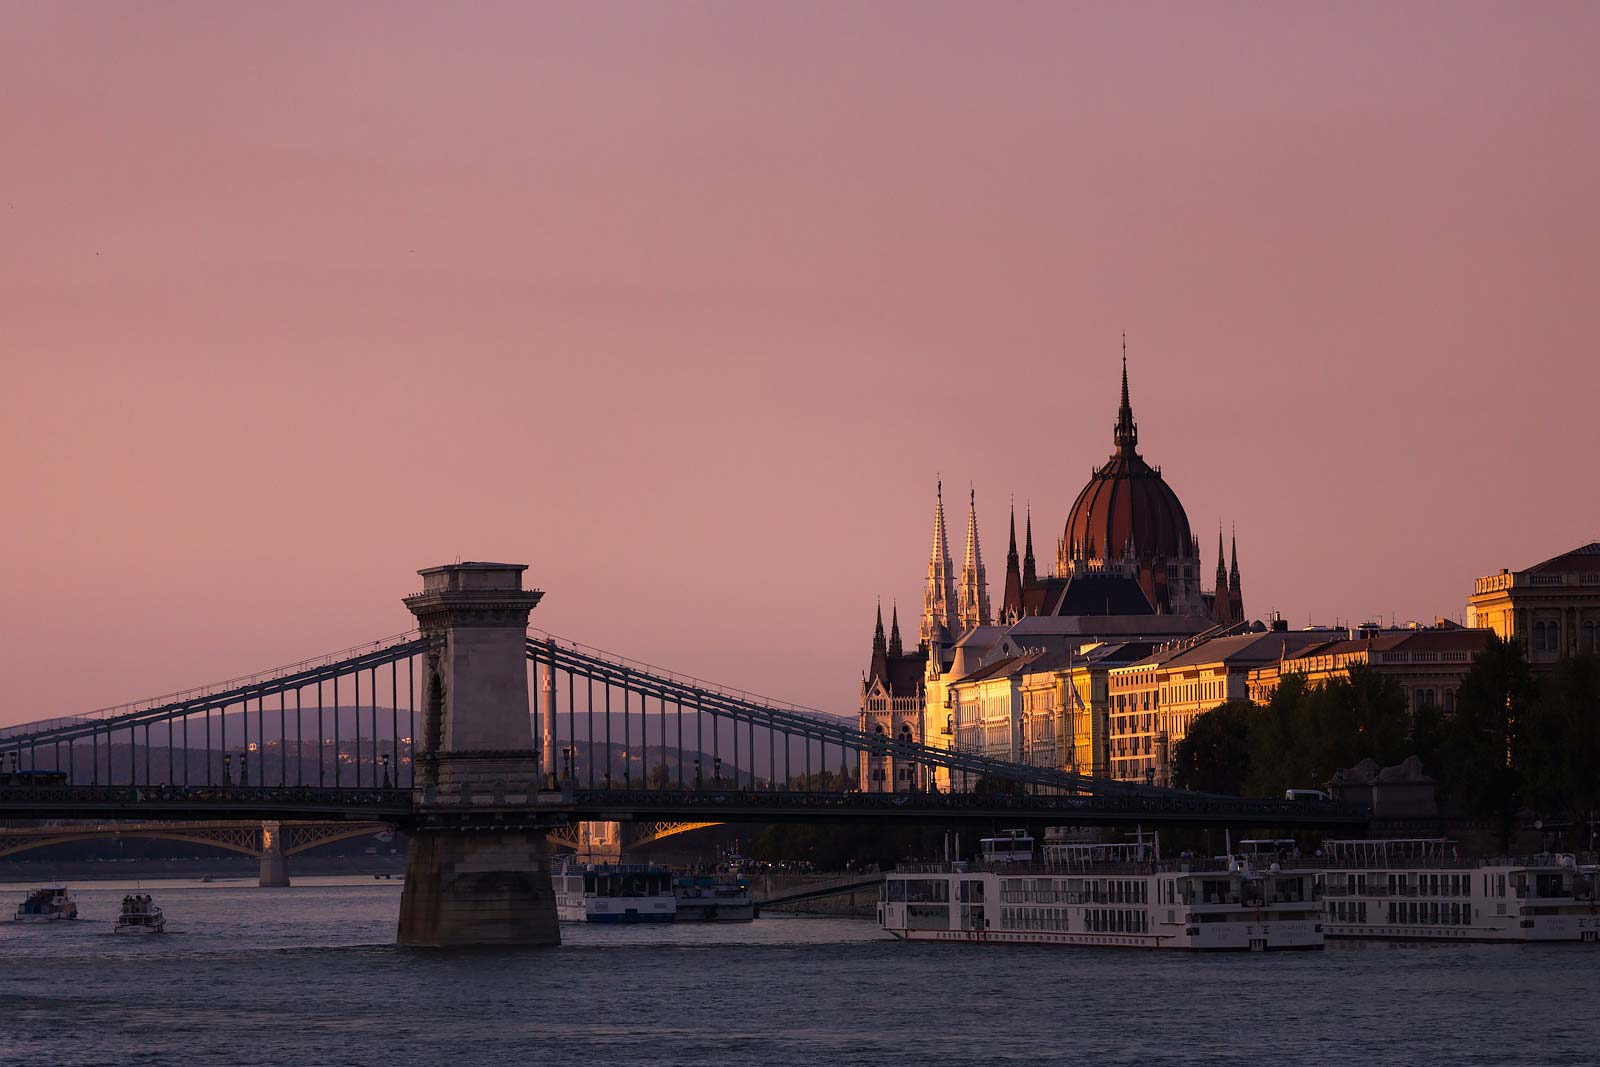 Budapest Parliament building at sunset